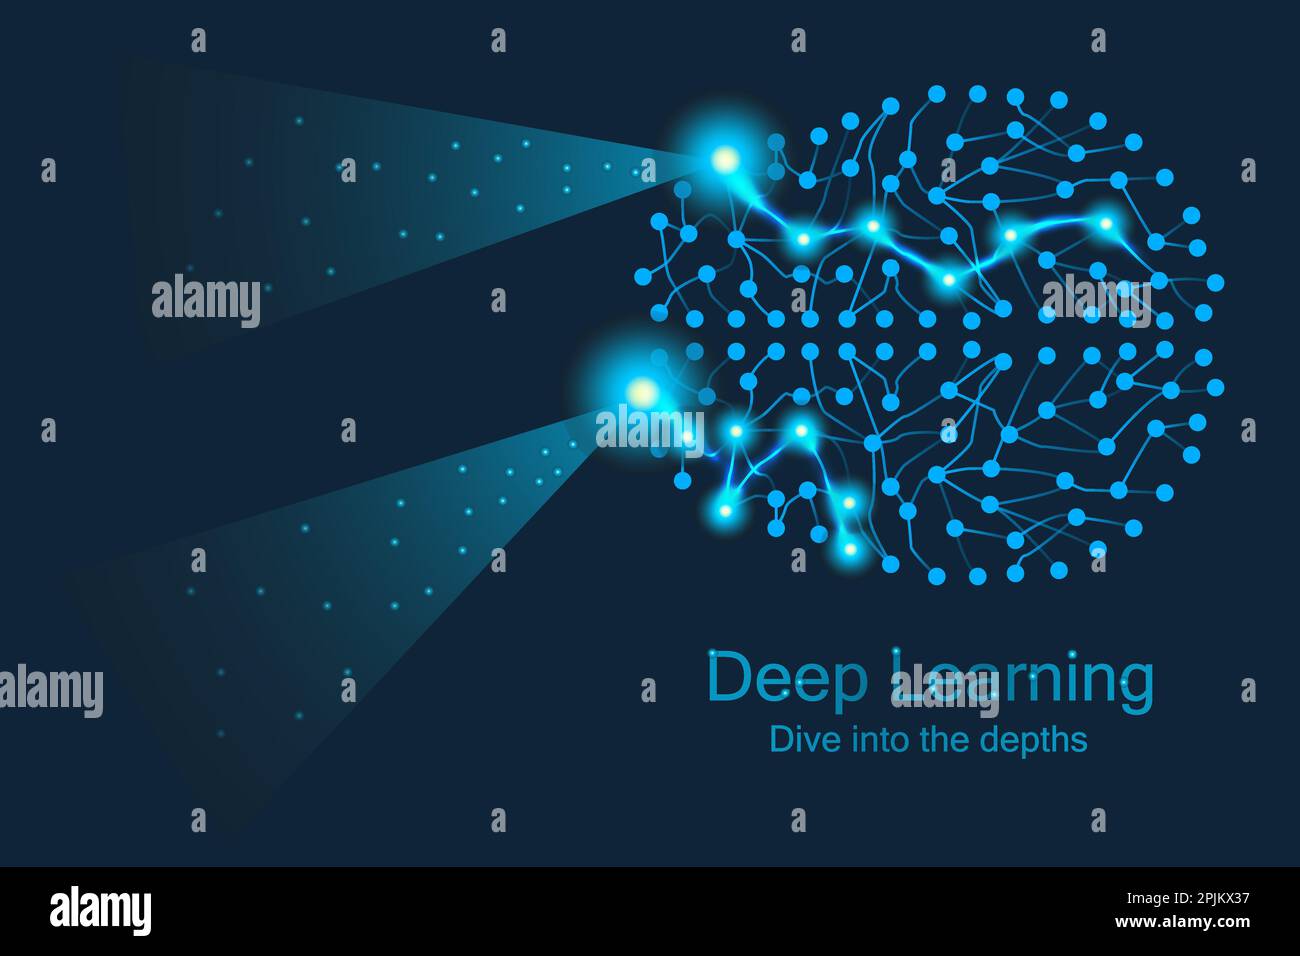 AI deep learning design concept. Artificial brain like submarine swimming at depth and research technology space. Applicable as banner background or p Stock Vector